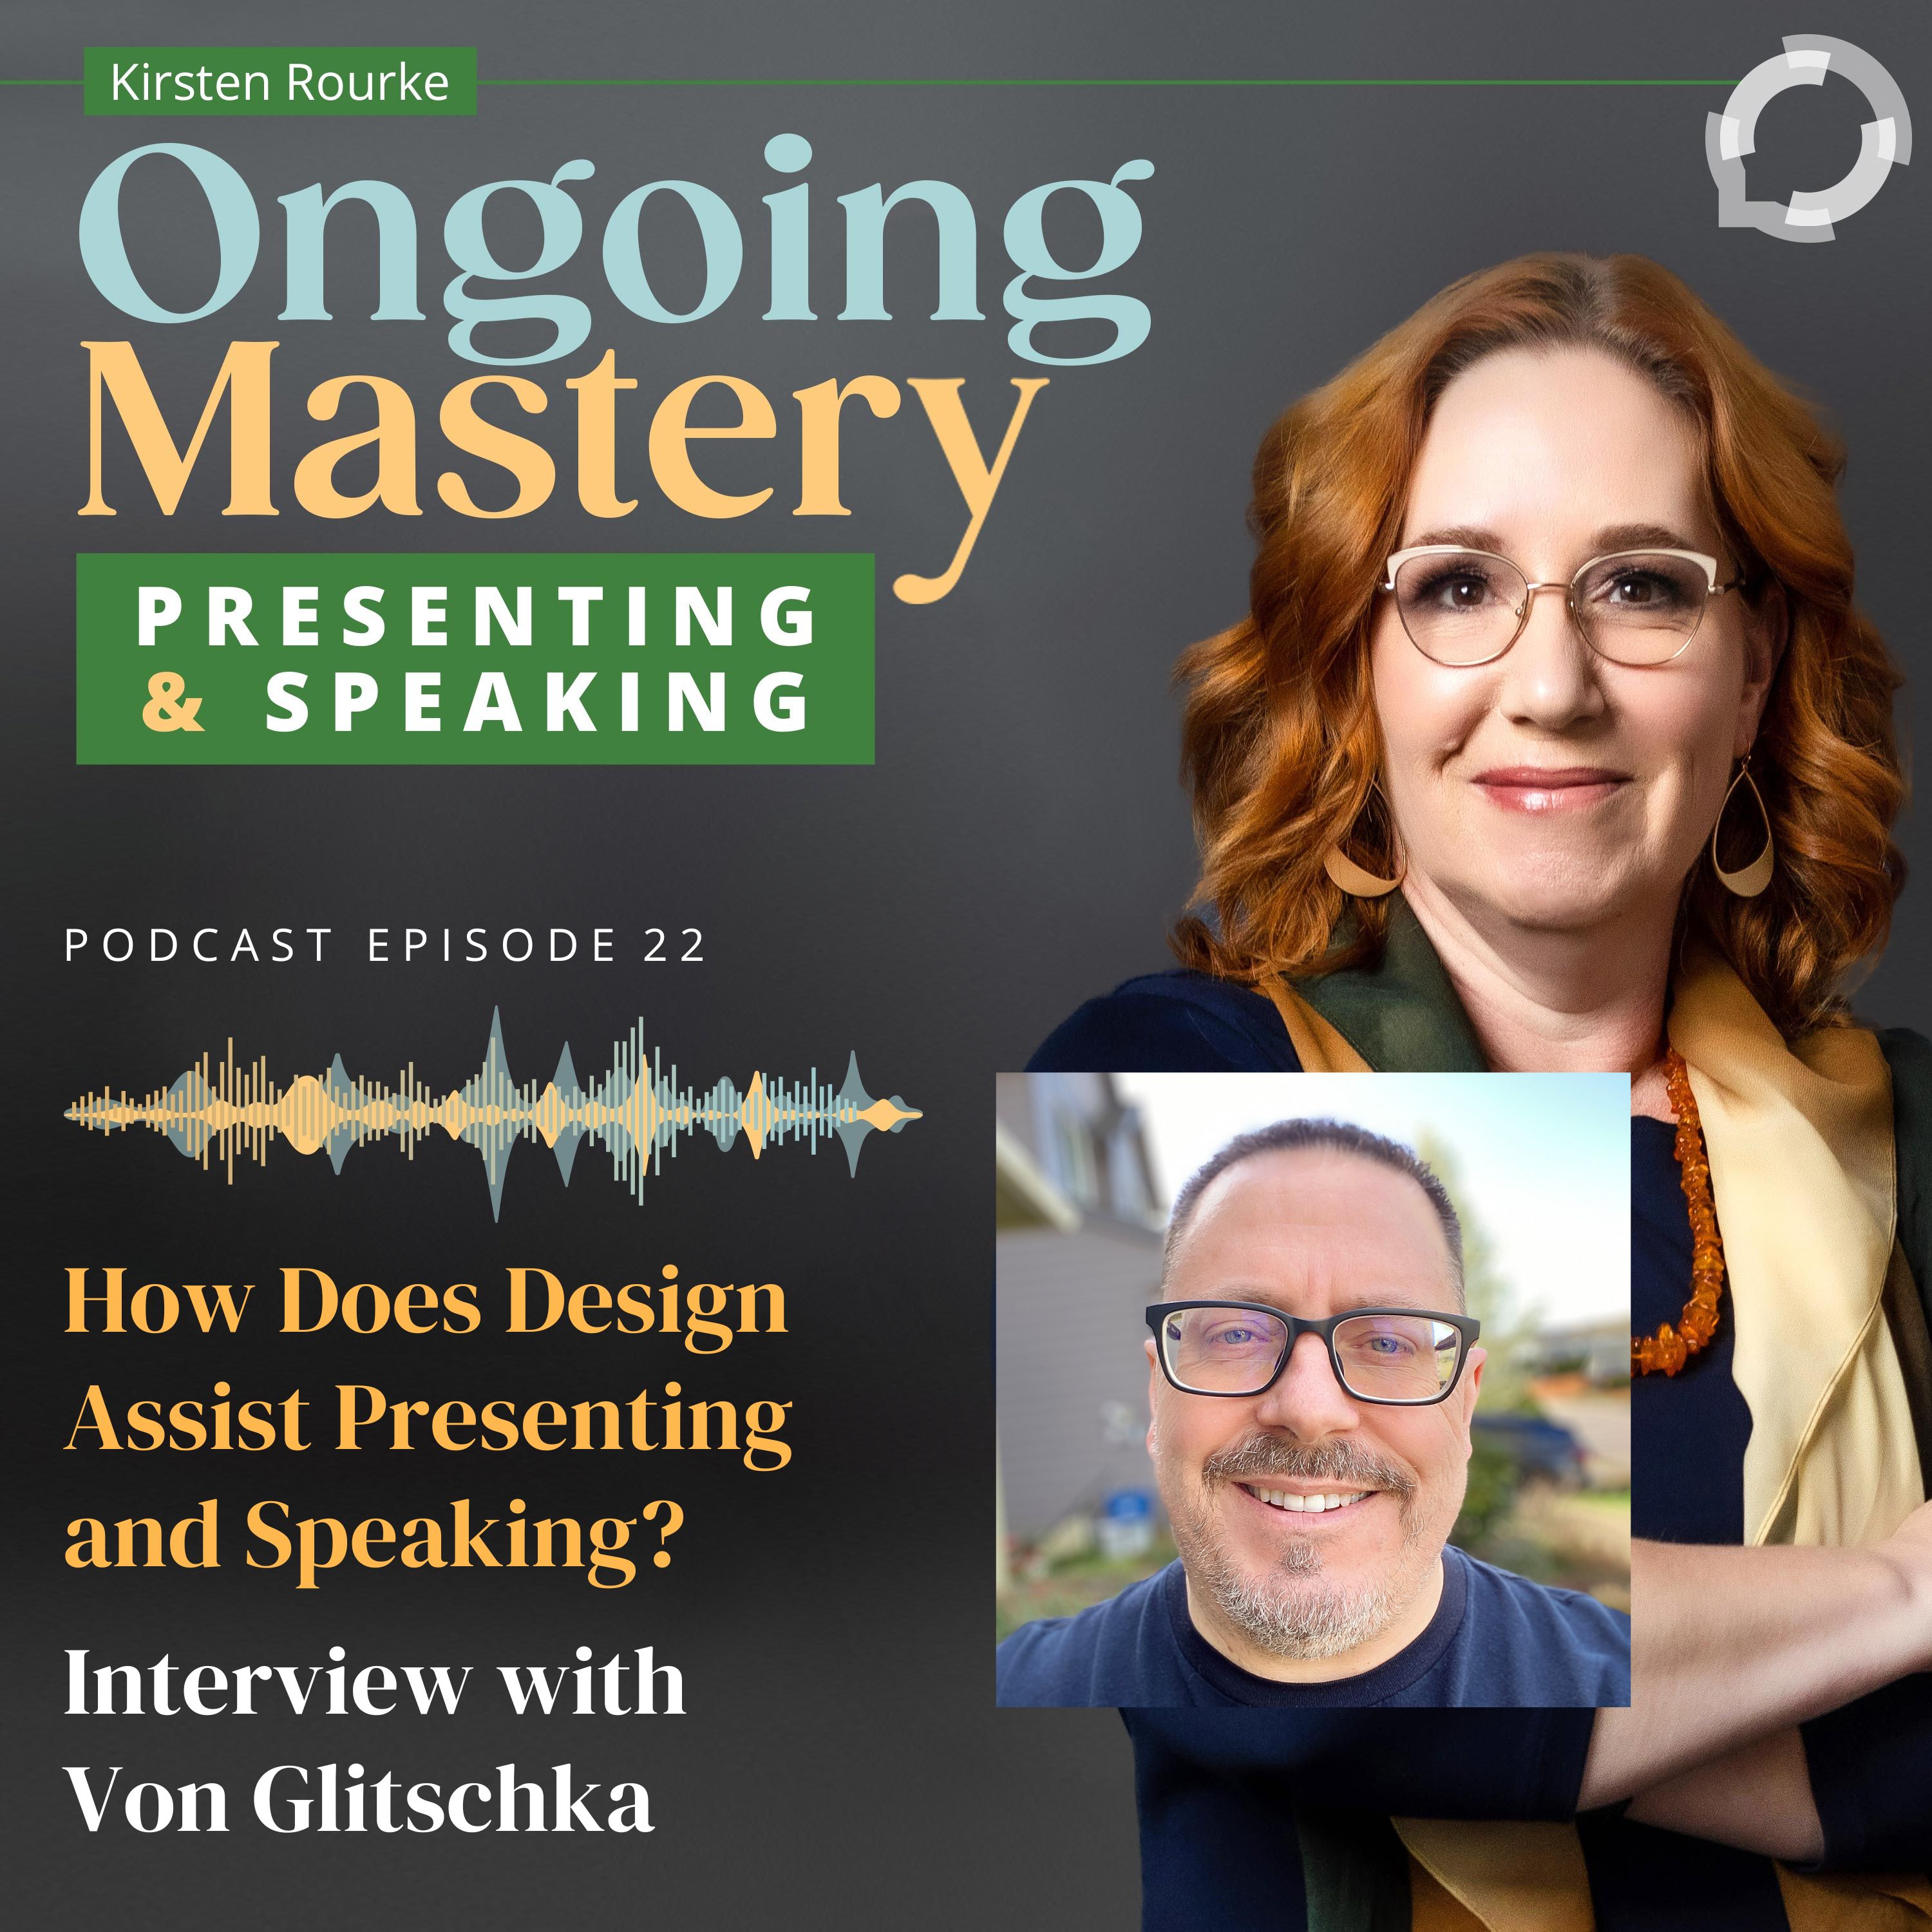 Artwork for podcast Ongoing Mastery: Presenting & Speaking